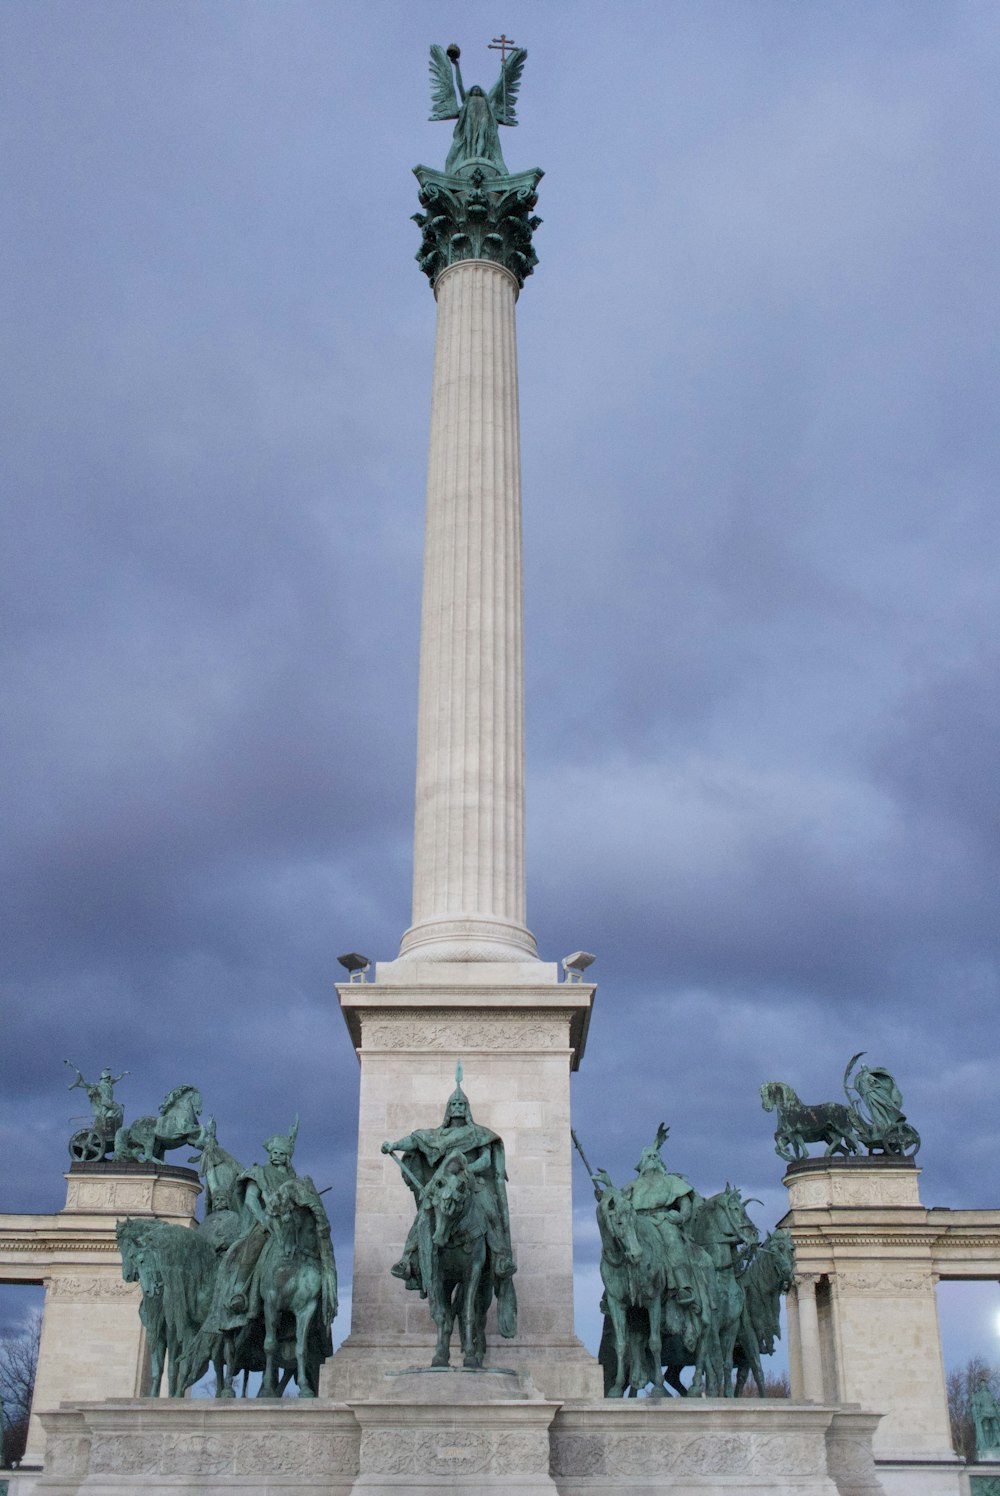 a monument with a statue of a man on top of it